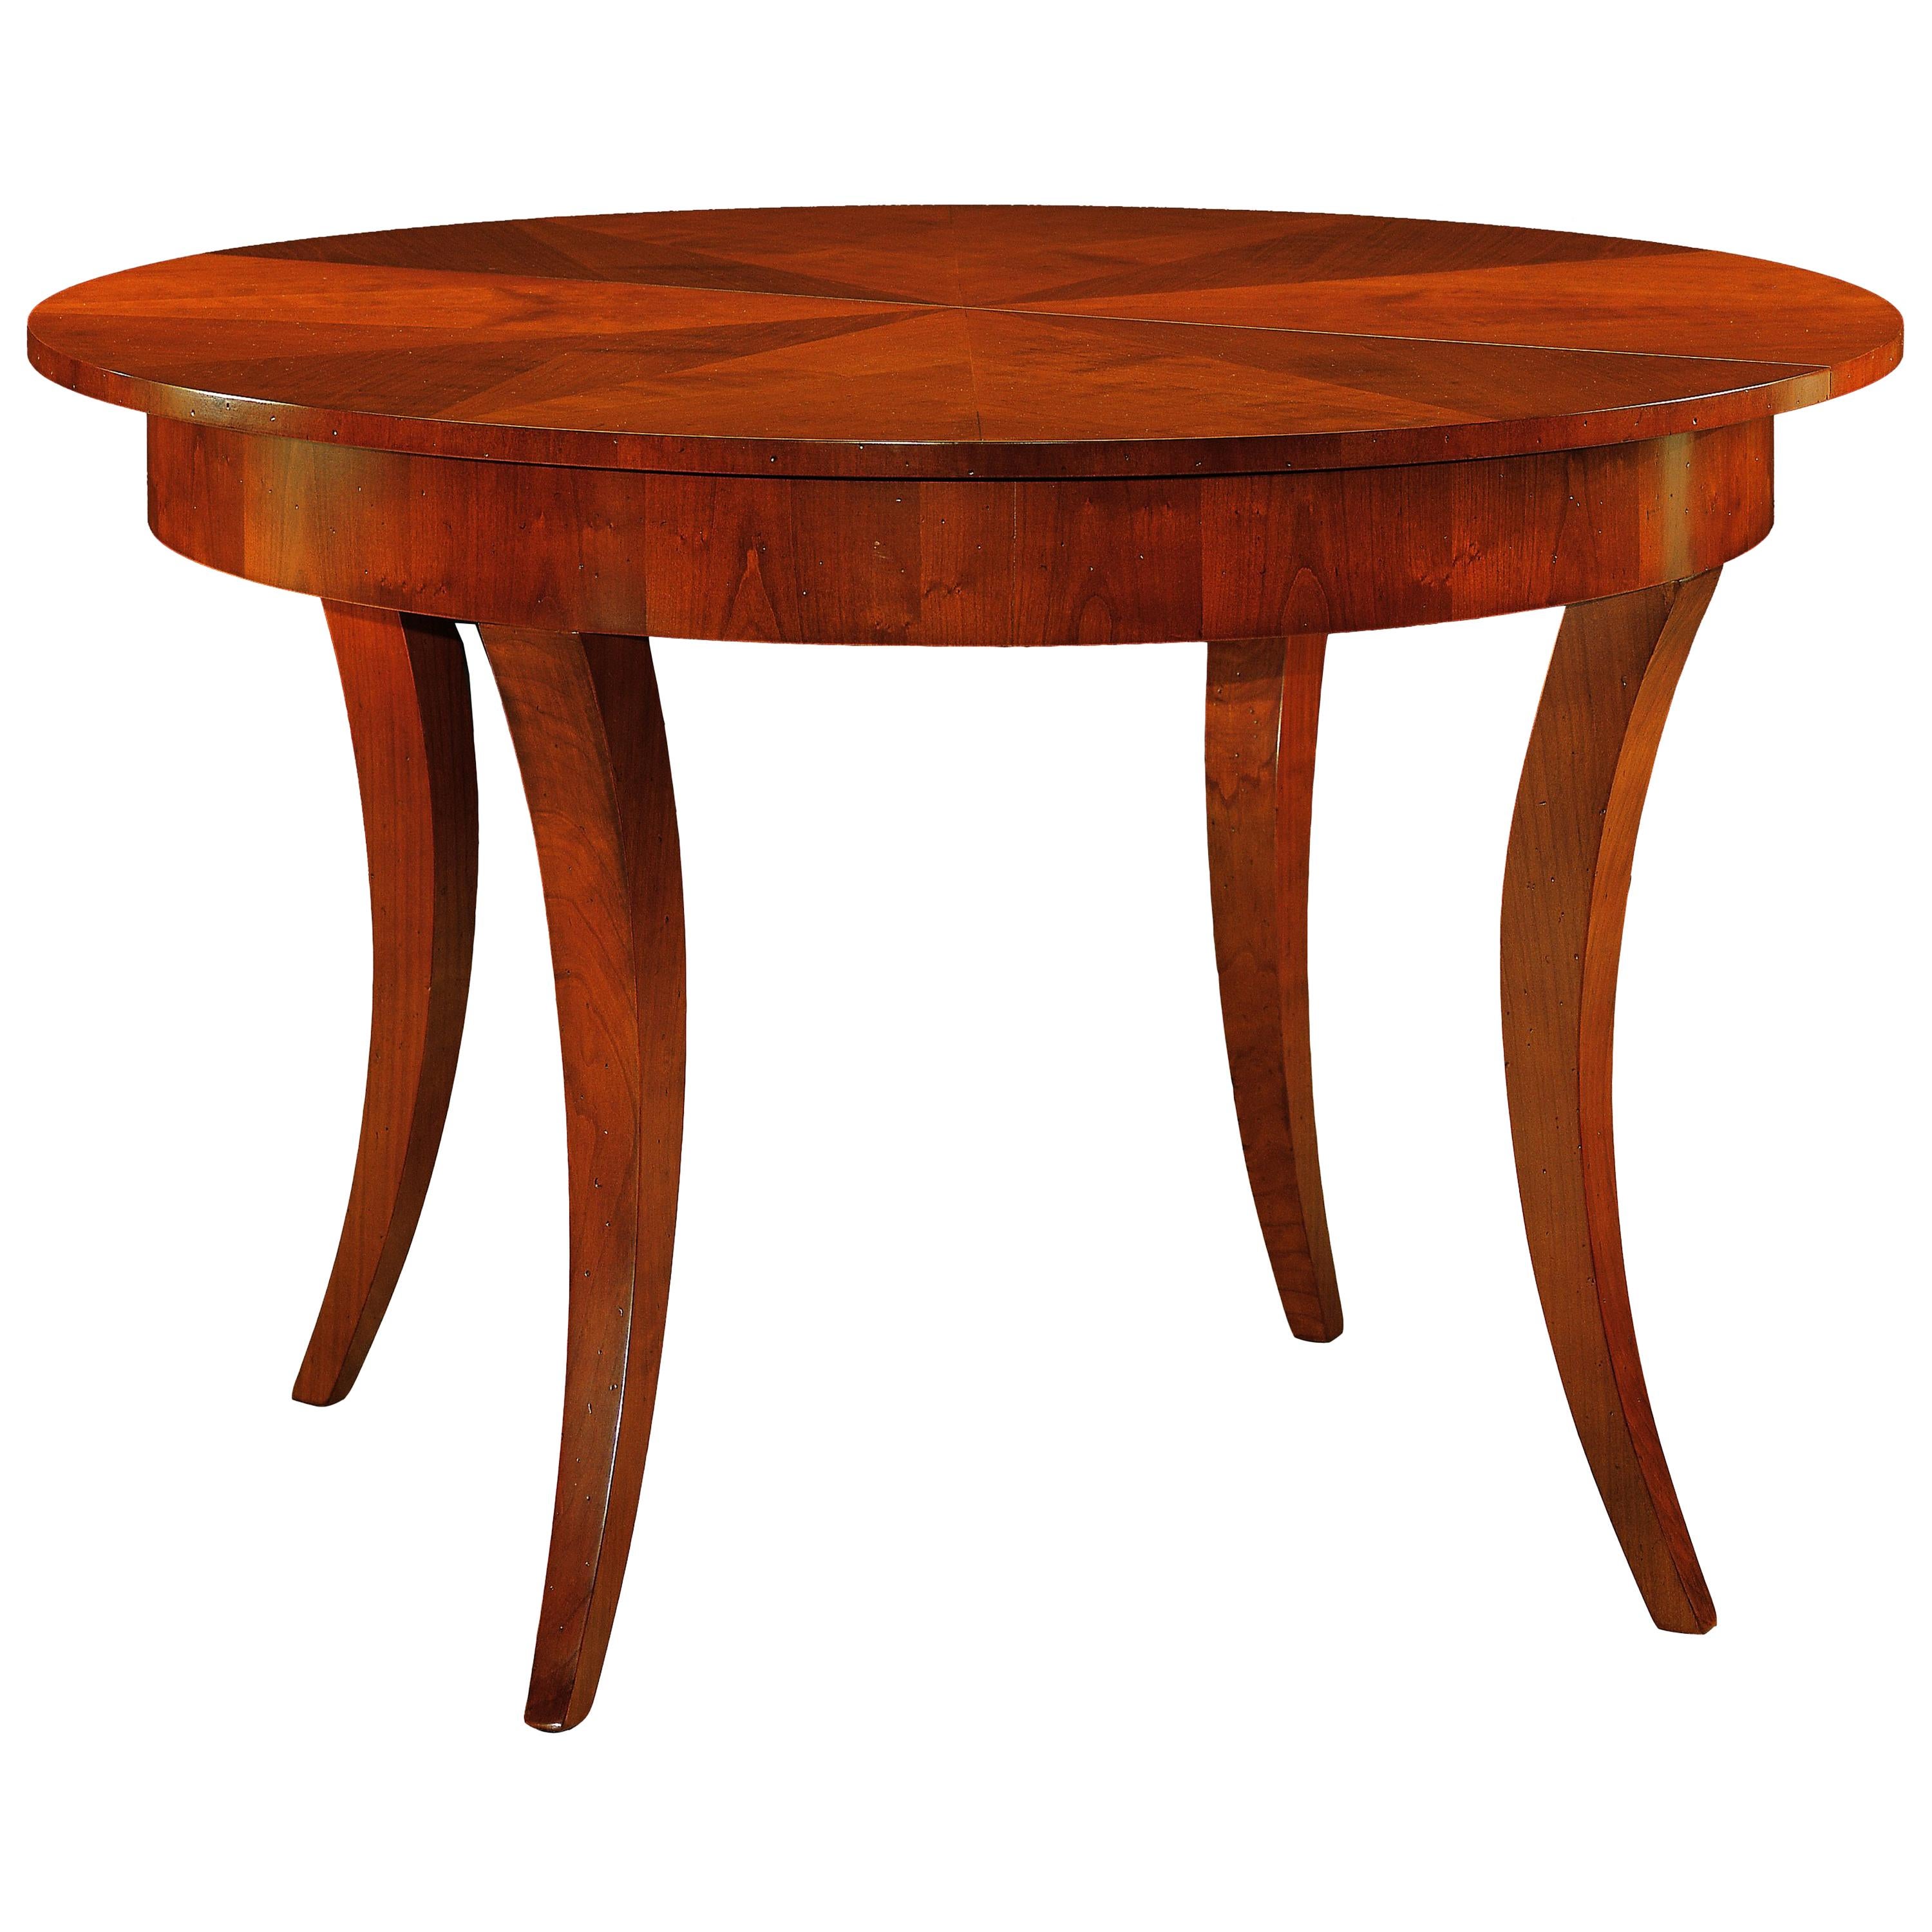 Contemporary Extendable Table in Biedermeier Style Made of Cherrywood